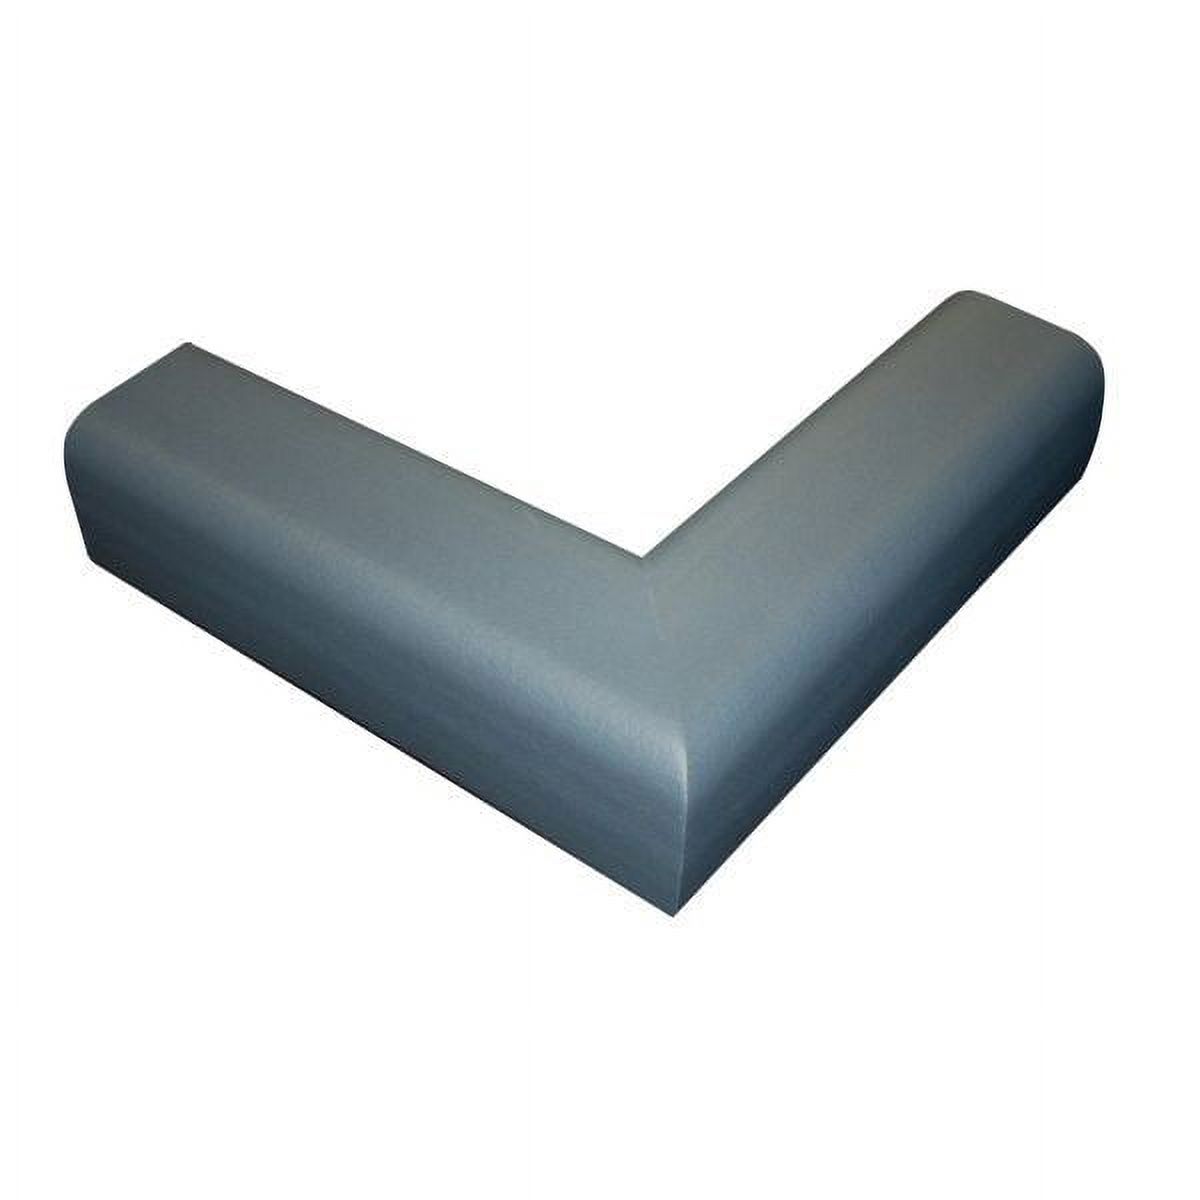 Cardinal Gates Hearth Pad Kit for Fireplaces - image 1 of 2